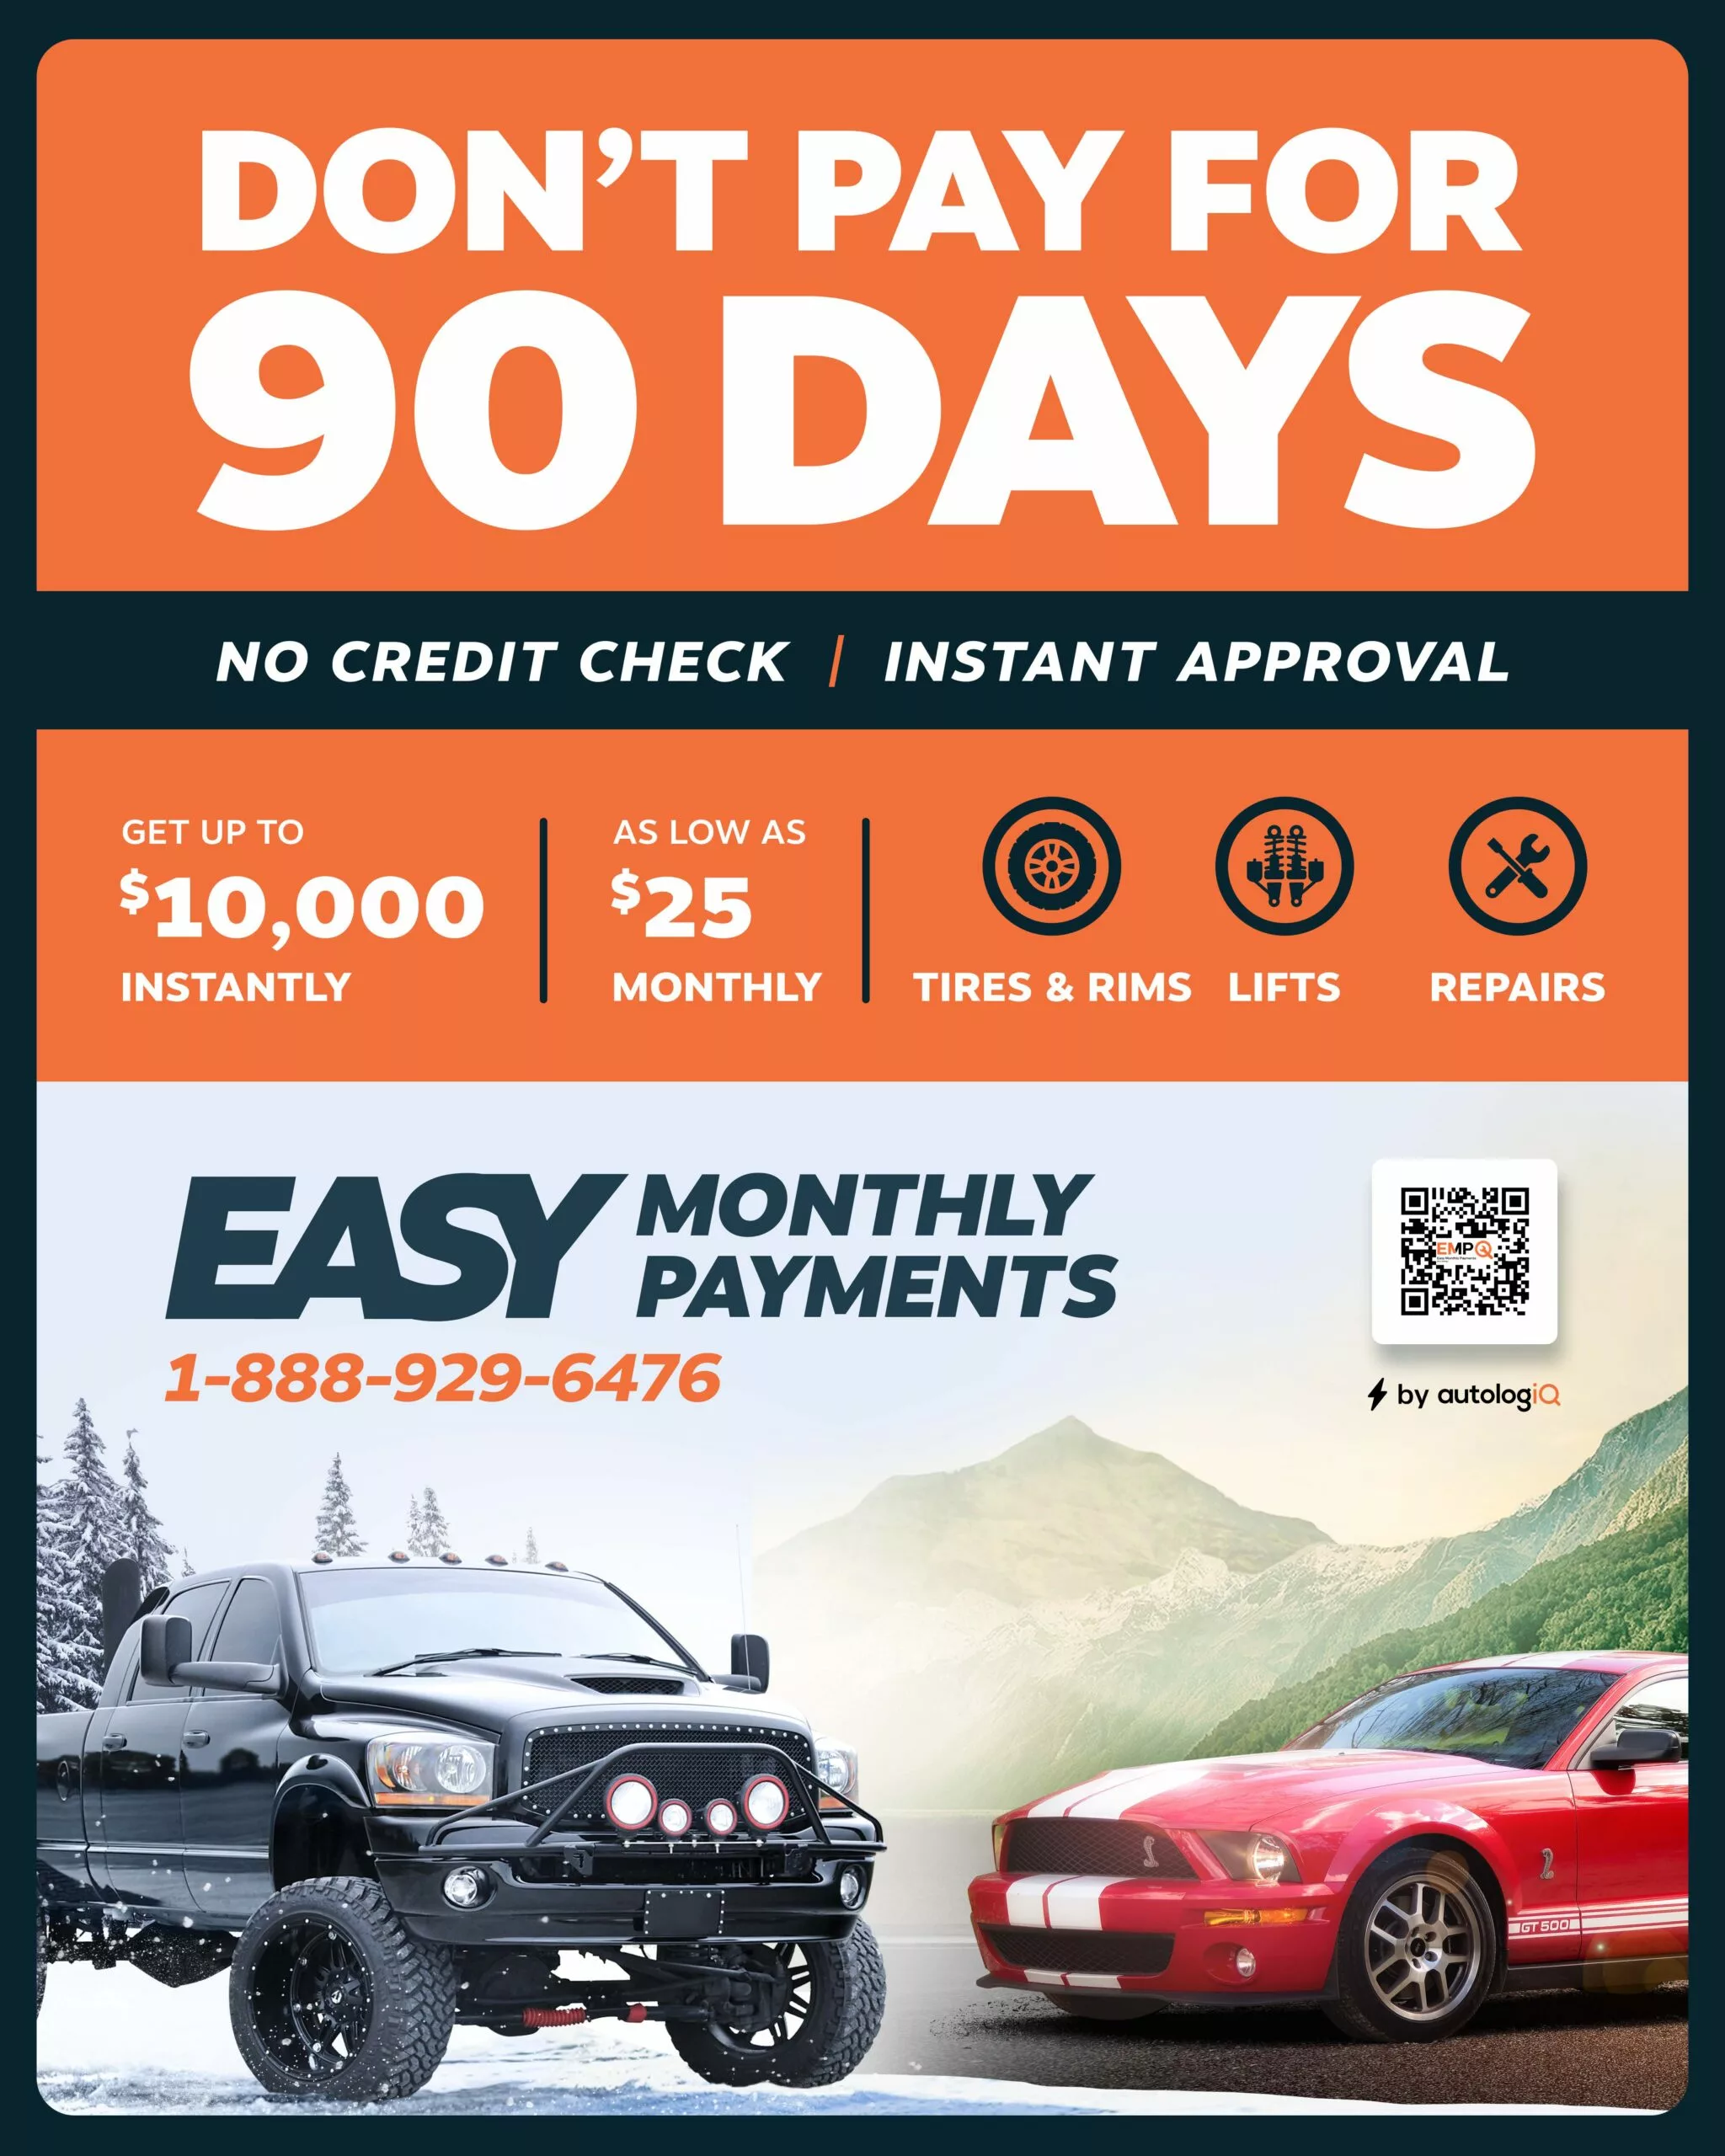 do not pay for 90 days Autologiq financing